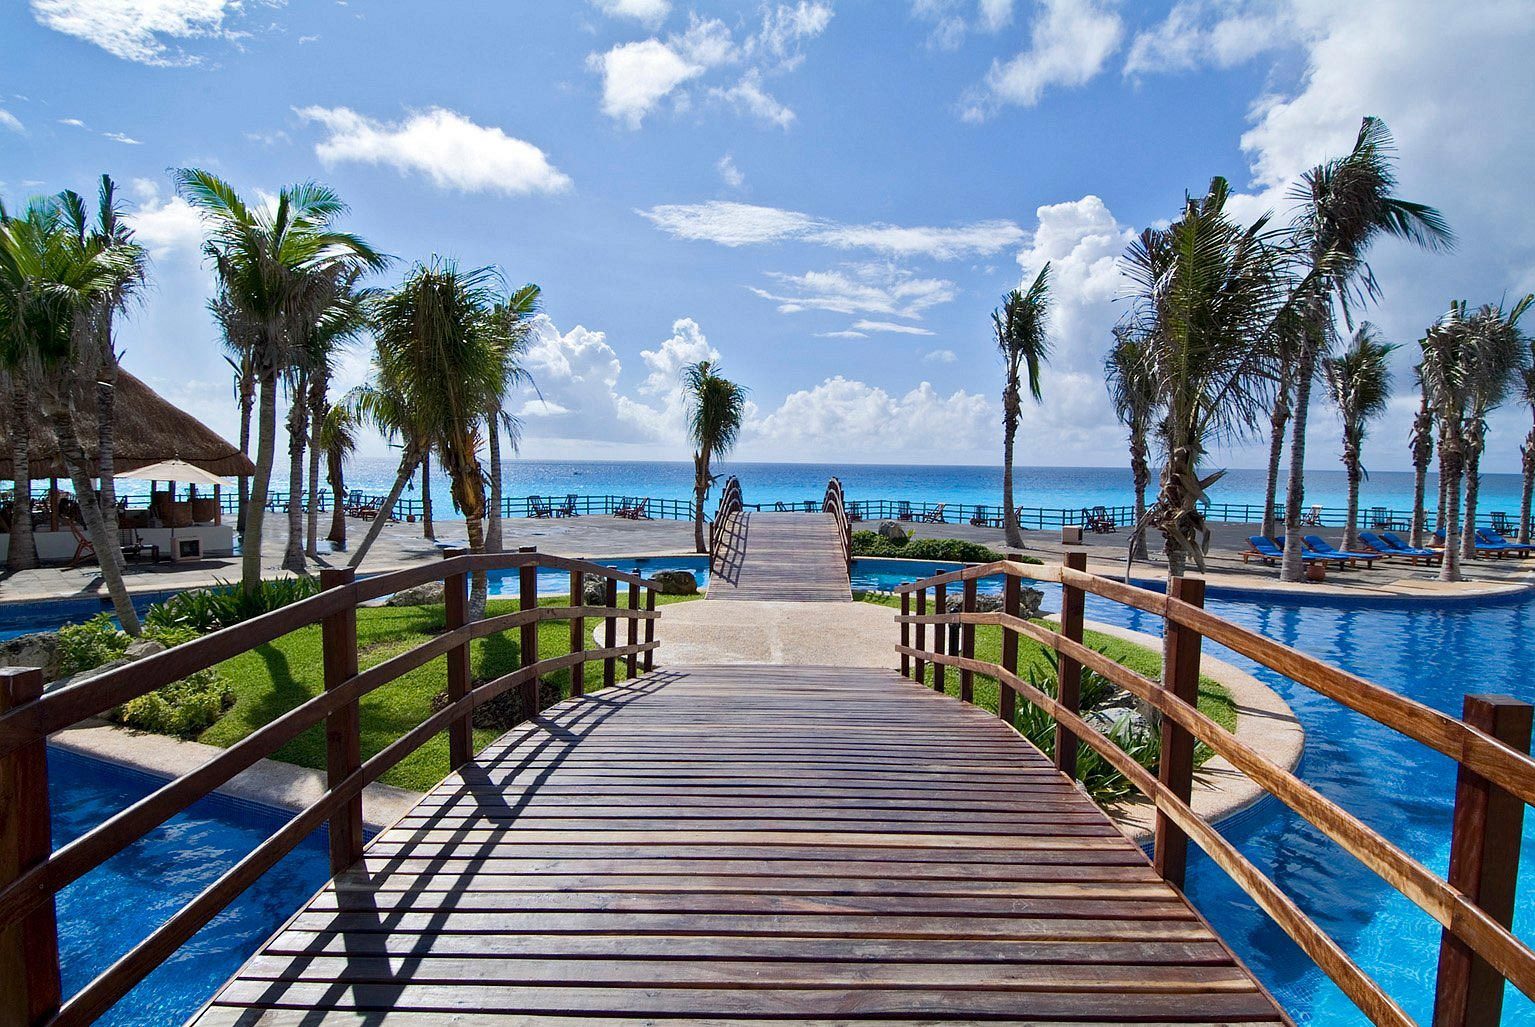 <h3>Grand Oasis Cancún, Mexico</h3> <p>The <a href="https://www.tripadvisor.com/Hotel_Review-g150807-d154444-Reviews-Grand_Oasis_Cancun-Cancun_Yucatan_Peninsula.html" rel="noopener noreferrer">Grand Oasis Cancún</a> is party central in the heart of Cancún's all-inclusive haven, the Hotel Zone. It takes its cue from <a href="https://www.rd.com/list/las-vegas-attractions/" rel="noopener noreferrer">Las Vegas</a> but adds plenty of Mexican spice for something really special. Bungee, tightropes, beach soccer and water slides also make fellow guests part of the entertainment.</p> <p>At the open-air bar Zocalo, a DJ spins three times a week, and a live band and Mexican or Caribbean celebrations take place the other four. Multiple other venues take the spotlight once the sun sets: the Oasis Arena features concerts by international artists—and is known to host a boxing championship or two. Fire and drum shows take place at the Atrium theater, but for something more risqué, the Kinky Night Club, featuring burlesque, live music and sketch acts, draws in revelers. Then there's the 24-hour casino, plus 13 restaurants to choose from. Or go for the extra-cost sensory gastronomy and specialty restaurant experiences if your favorite performance art is culinary.</p> <p><strong>Pros:</strong></p> <ul> <li>Nonstop schedule of events for those who like to stay busy</li> <li>Adults-only spaces, evening venues and entertainment</li> </ul> <p><strong>Cons:</strong></p> <ul> <li>Can be loud and overstimulating</li> <li>Several restaurants require additional cost</li> </ul> <p class="listicle-page__cta-button-shop"><a class="shop-btn" href="https://www.tripadvisor.com/Hotel_Review-g150807-d154444-Reviews-Grand_Oasis_Cancun-Cancun_Yucatan_Peninsula.html">Book Now</a></p>